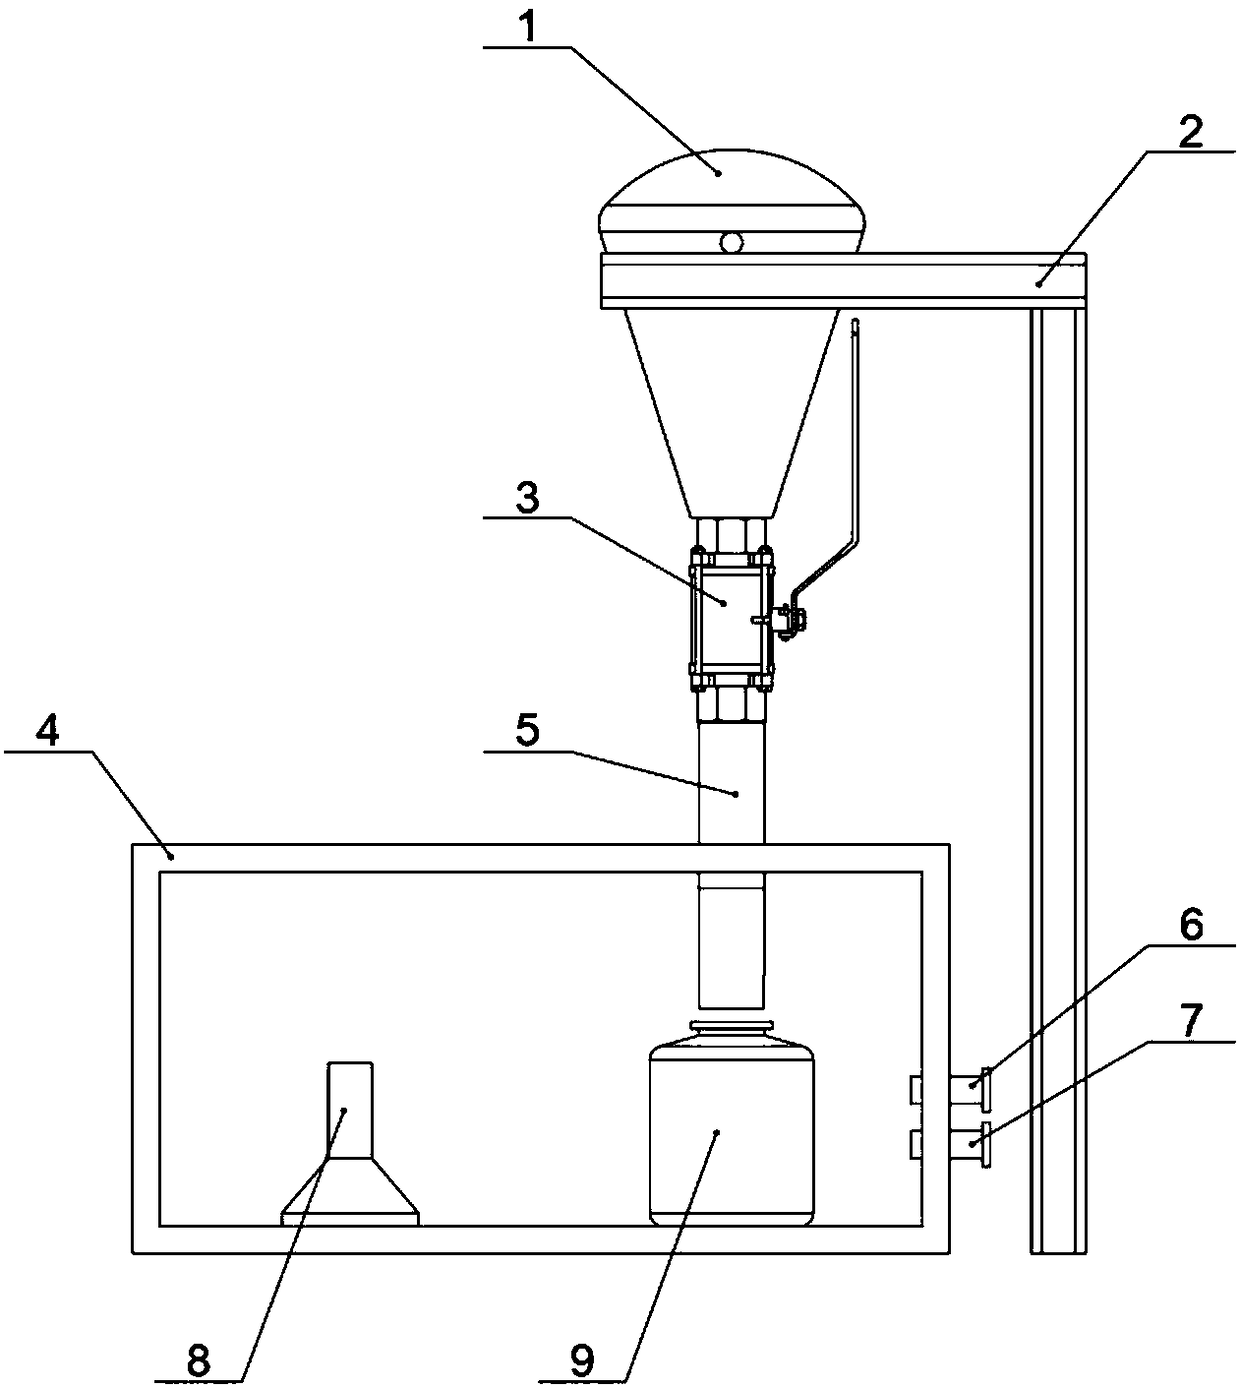 Packaging device for reactive metal powder for 3D printing